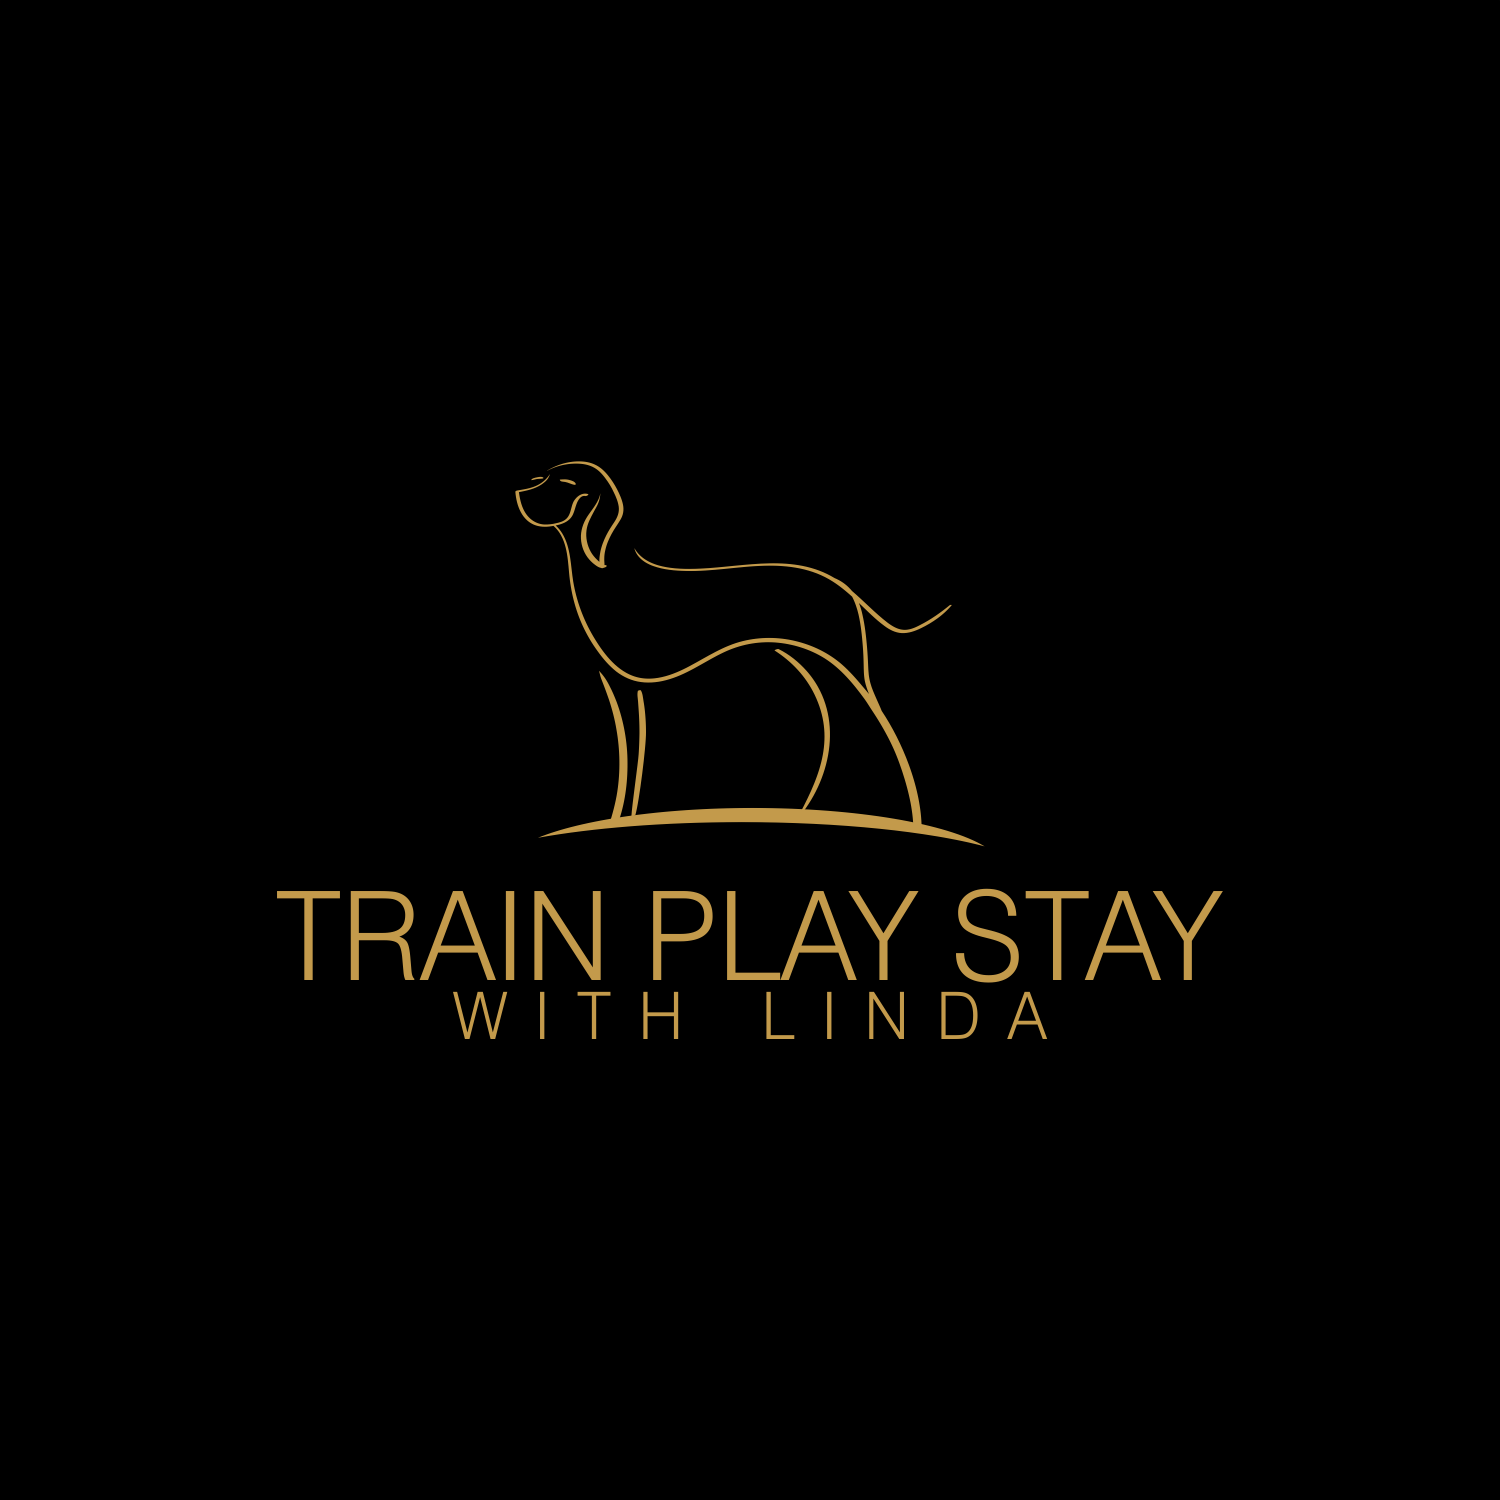 Colorful Dog Logo - Playful, Colorful, Dog Training Logo Design for Train Play Stay OR